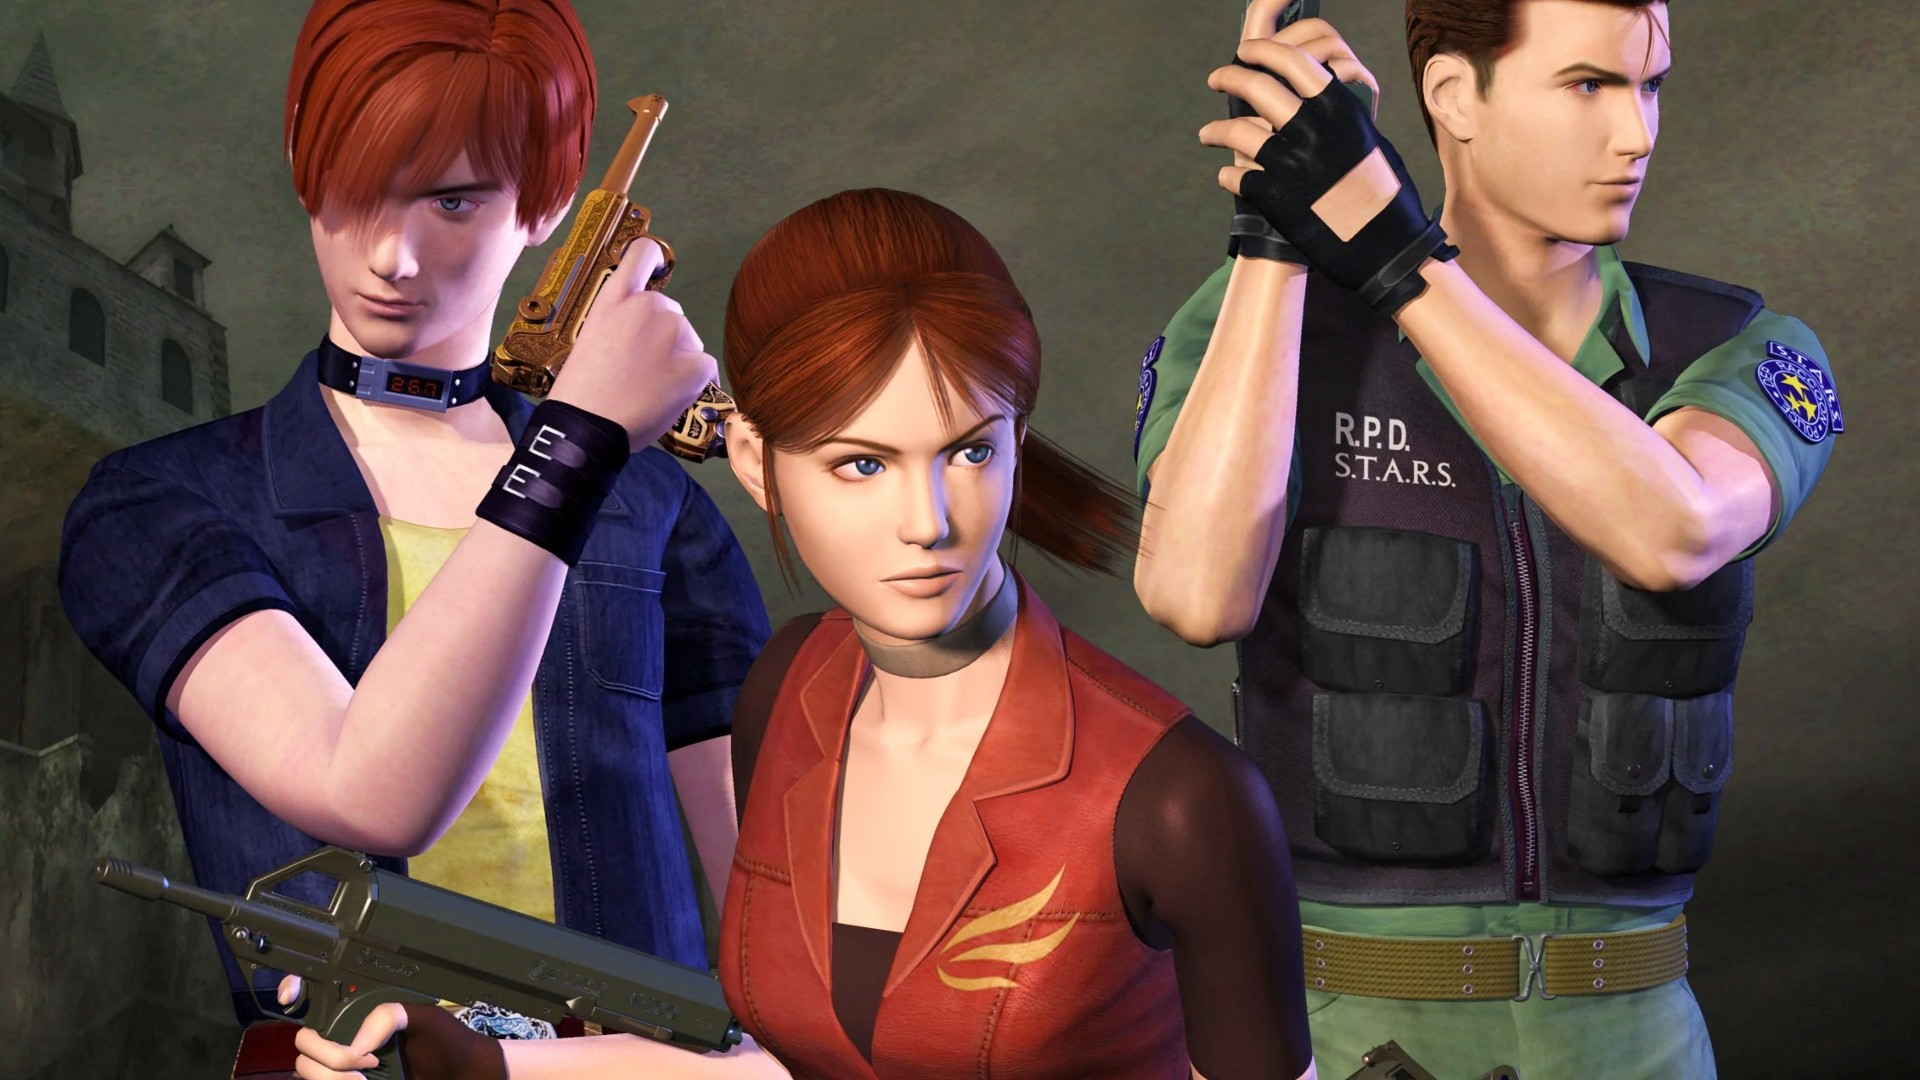 Resident Evil 2 without moving: Three survivors, Chris Redfield, Claire Redfield, and Steve Burnside from Capcom horror game Resident Evil Code Veronica